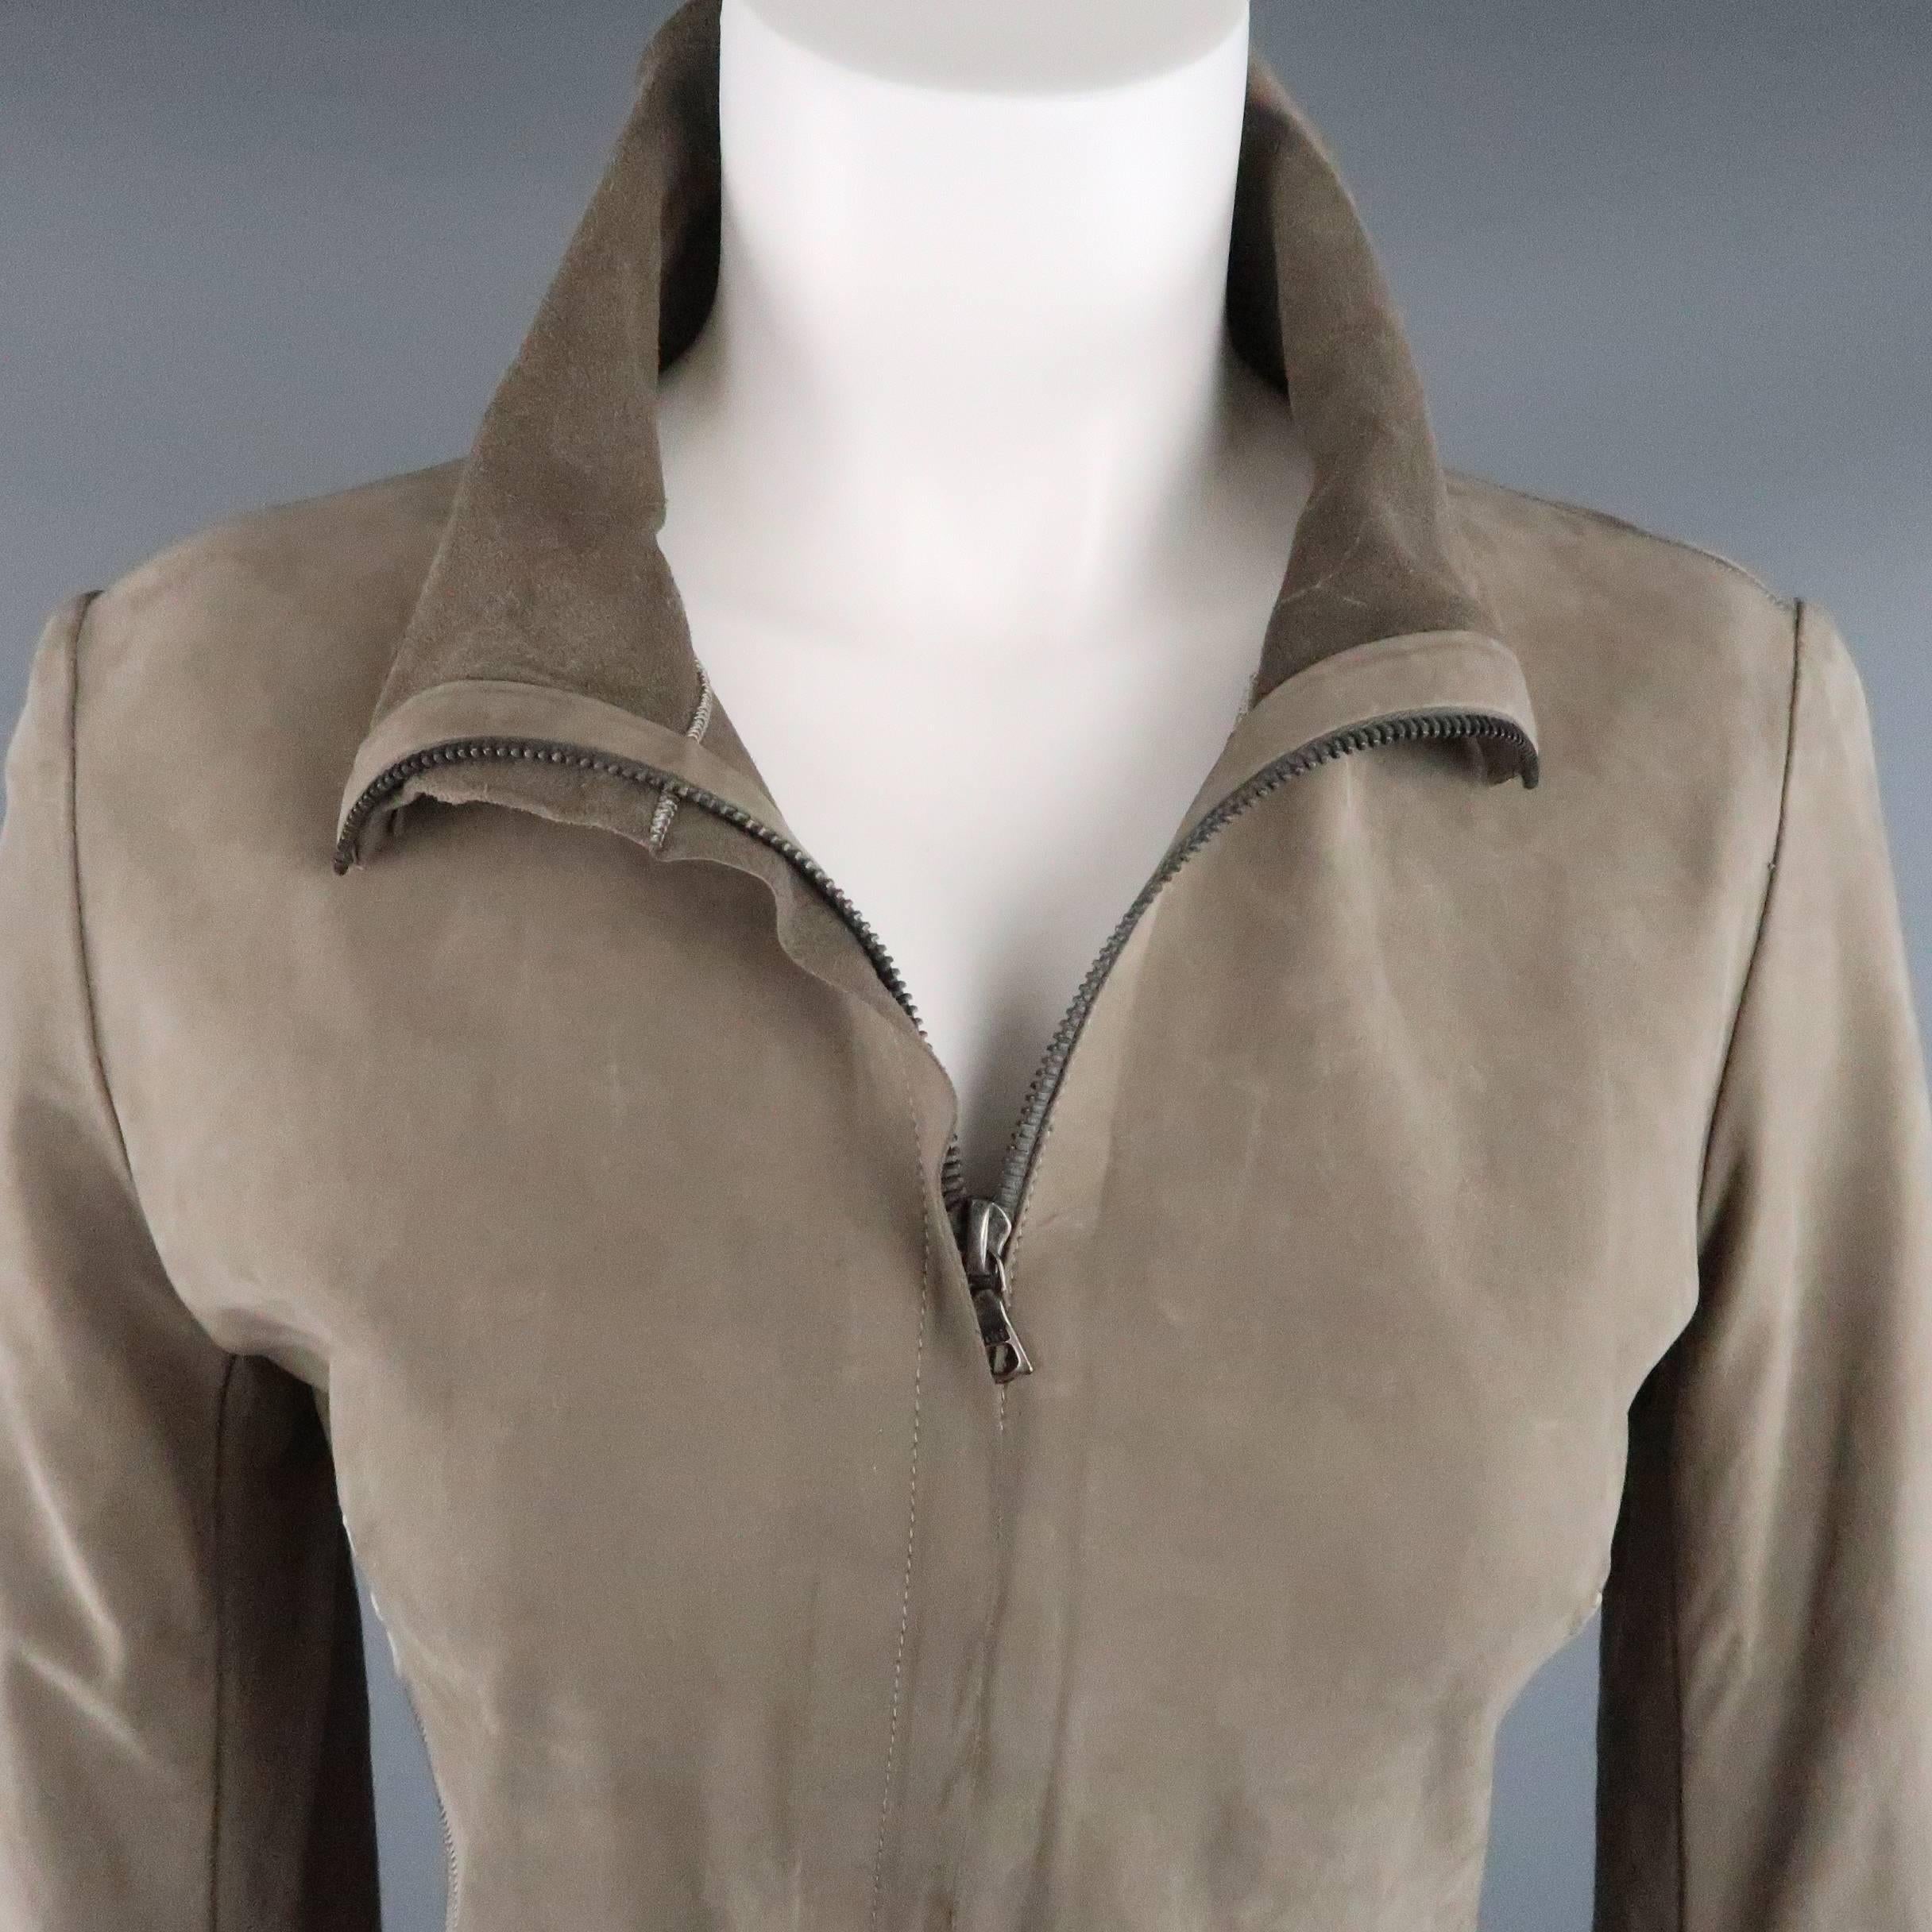 EXPERIENCE by ISAAC SELLAM jacket comes in a light weight, distressed taupe nubuck leather and features silver stitching details, hidden placket double zip closure, high collar, and silver tone 